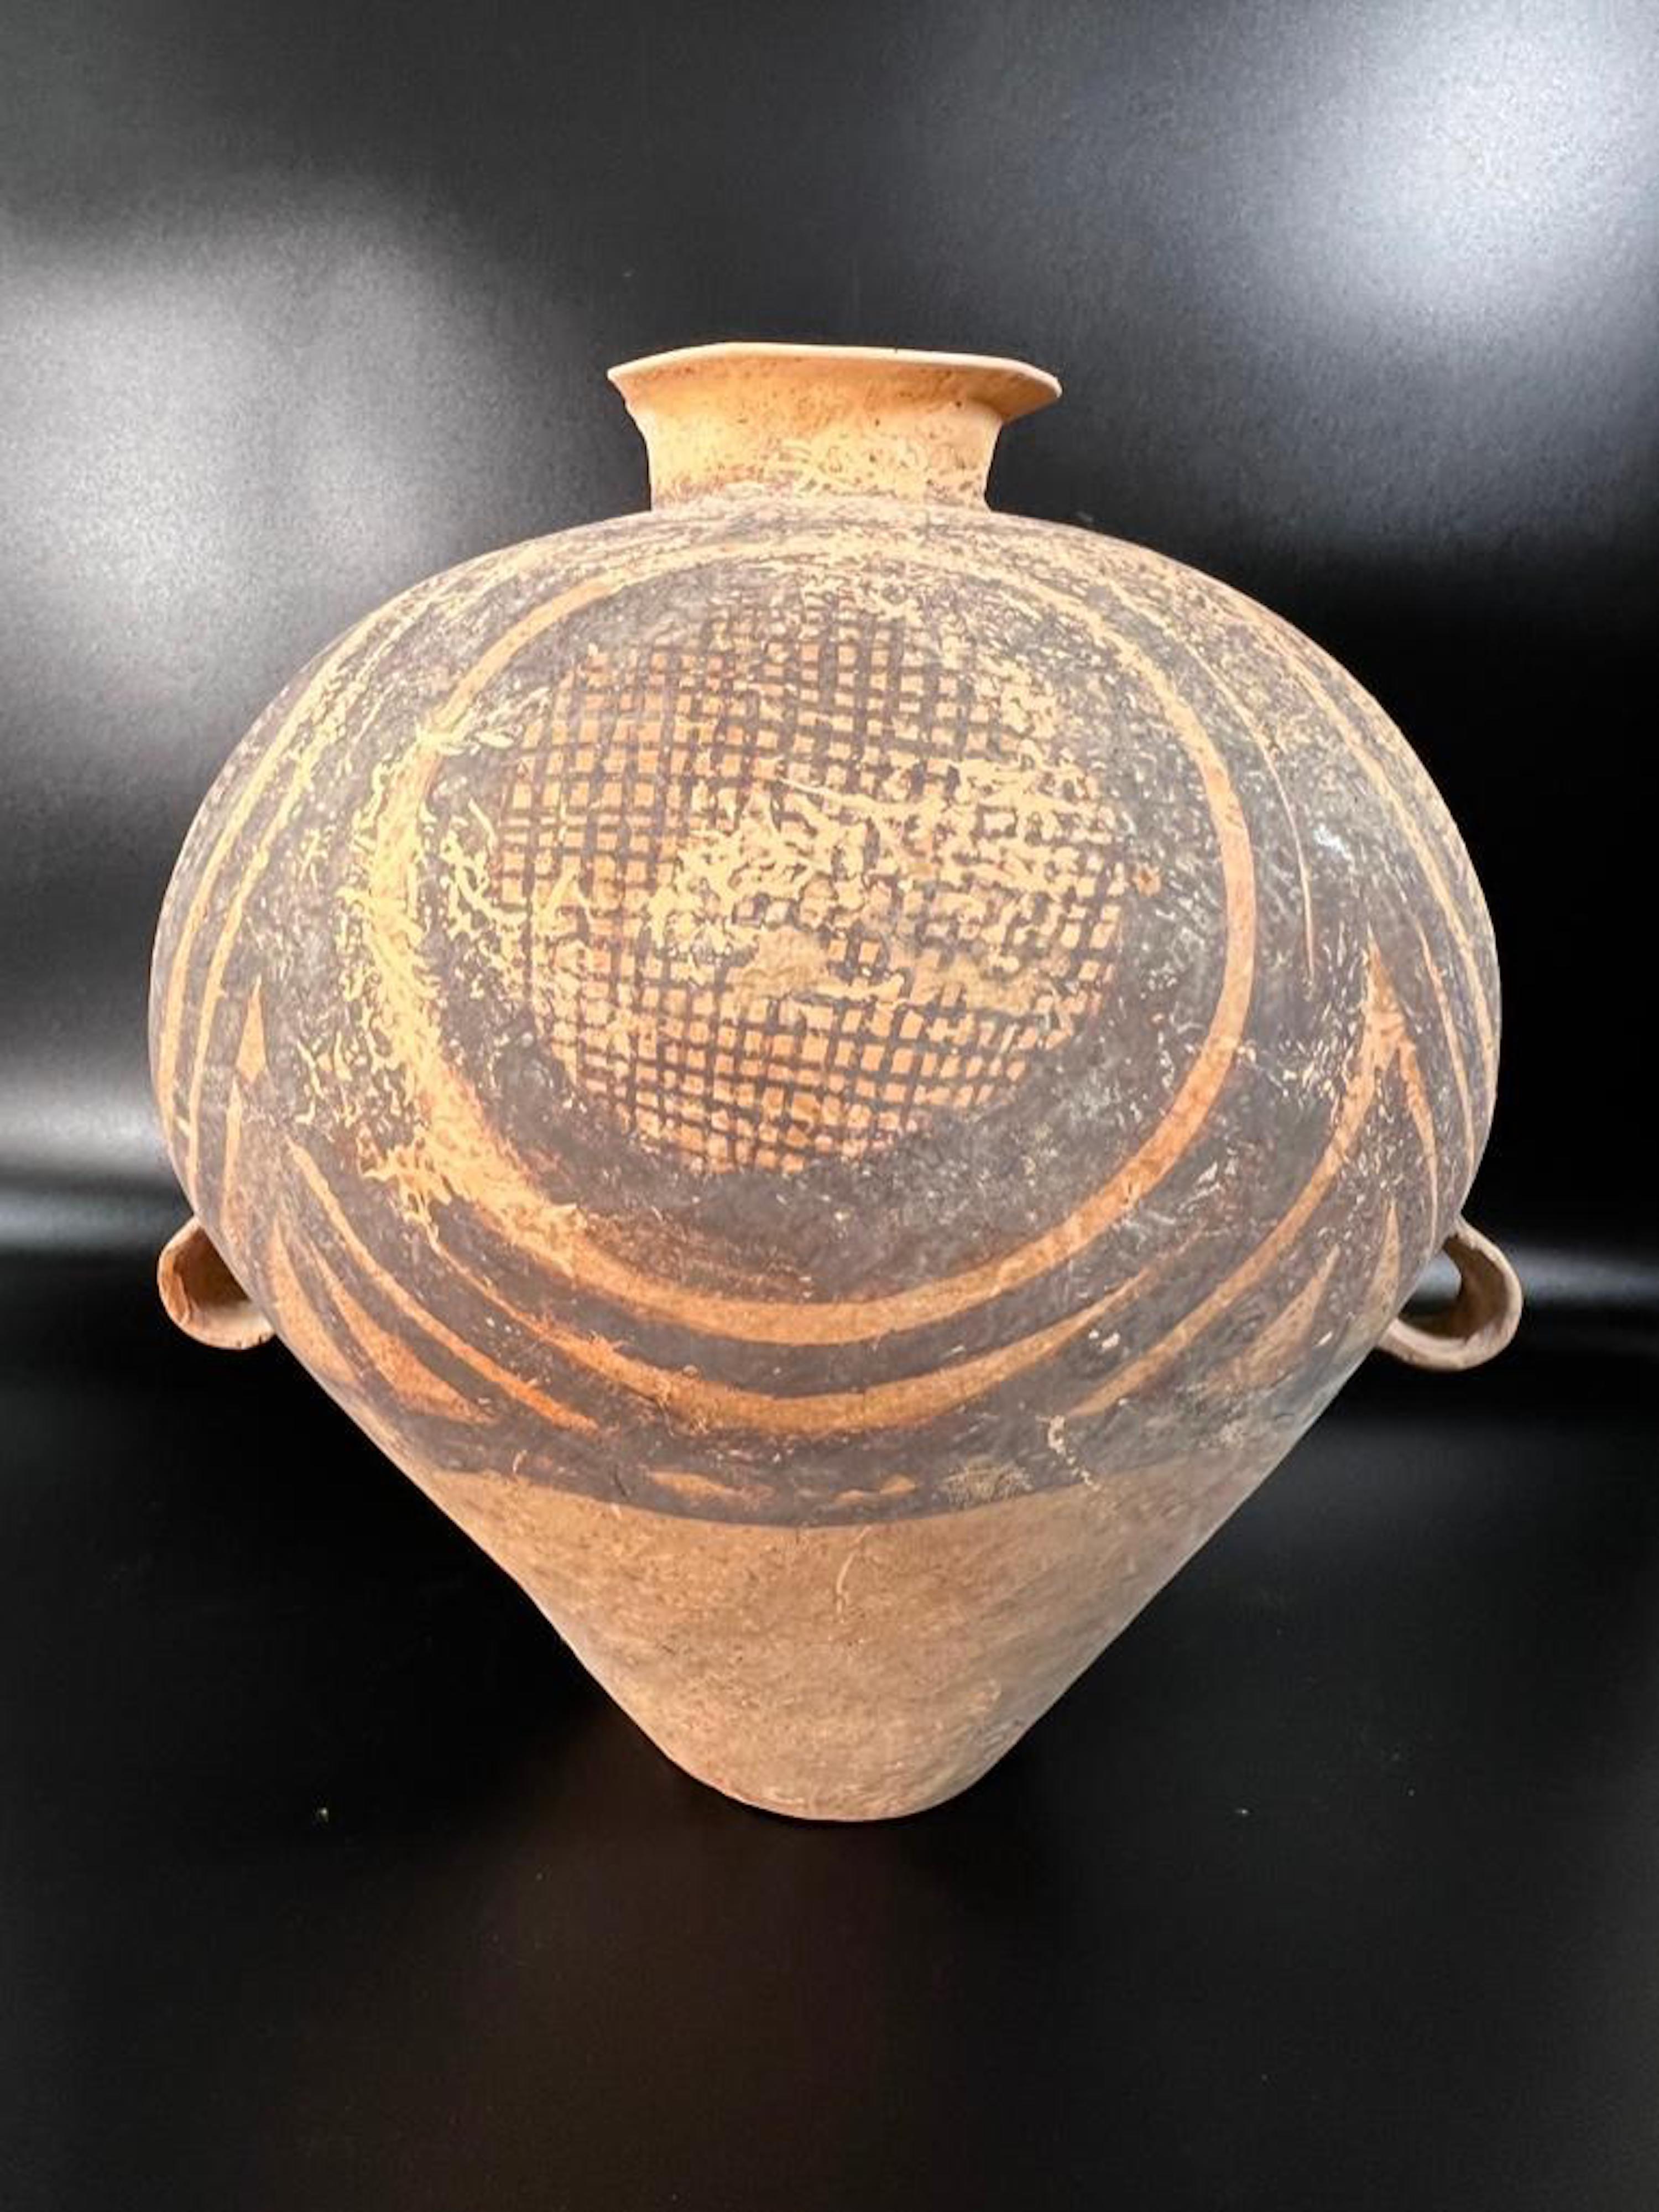 Chinese pottery jar, possibly a Neolithic ceramic, est. $400-$600